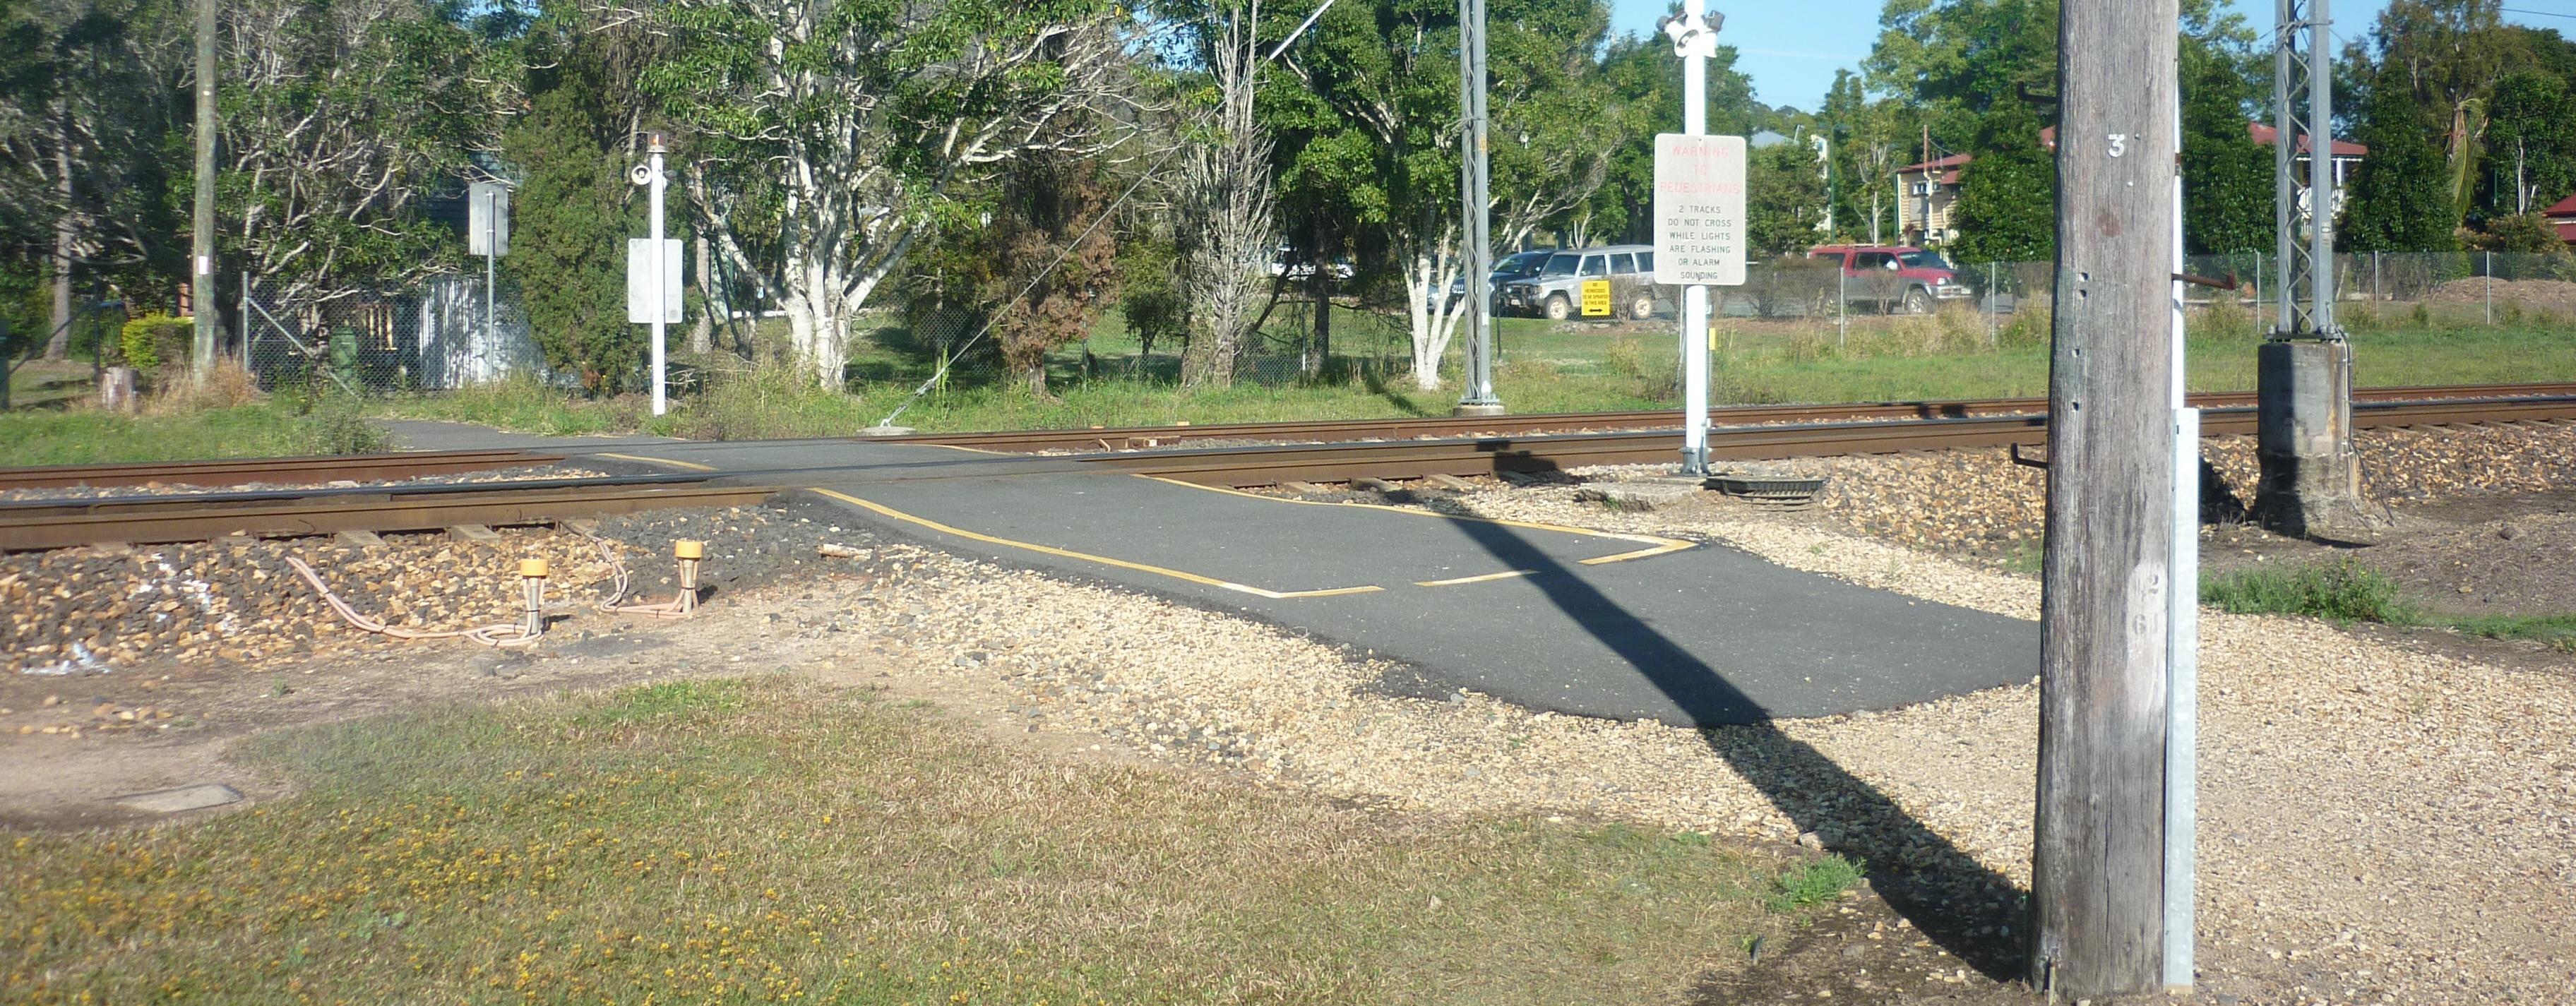 Image of the Pomona pedestrian rail crossing prior to be upgraded in 2020